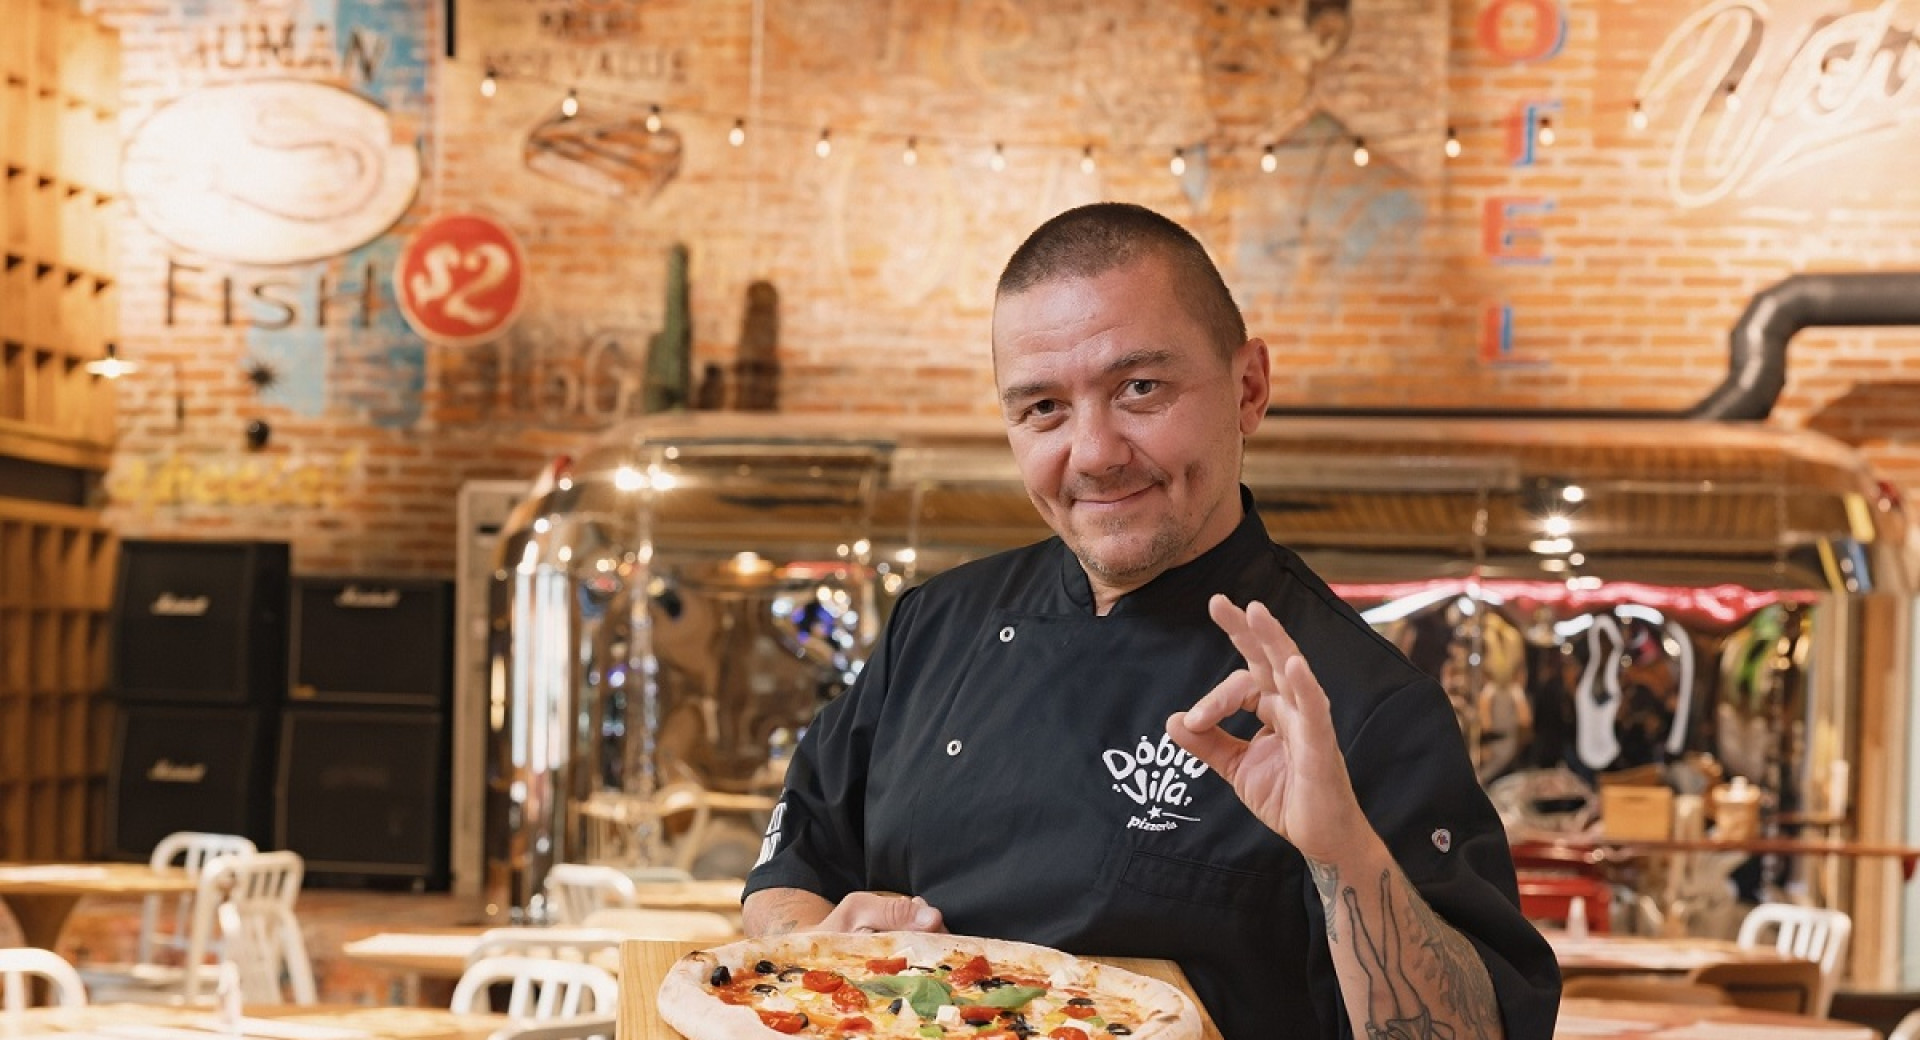 Chef in black with pizza on a tray.